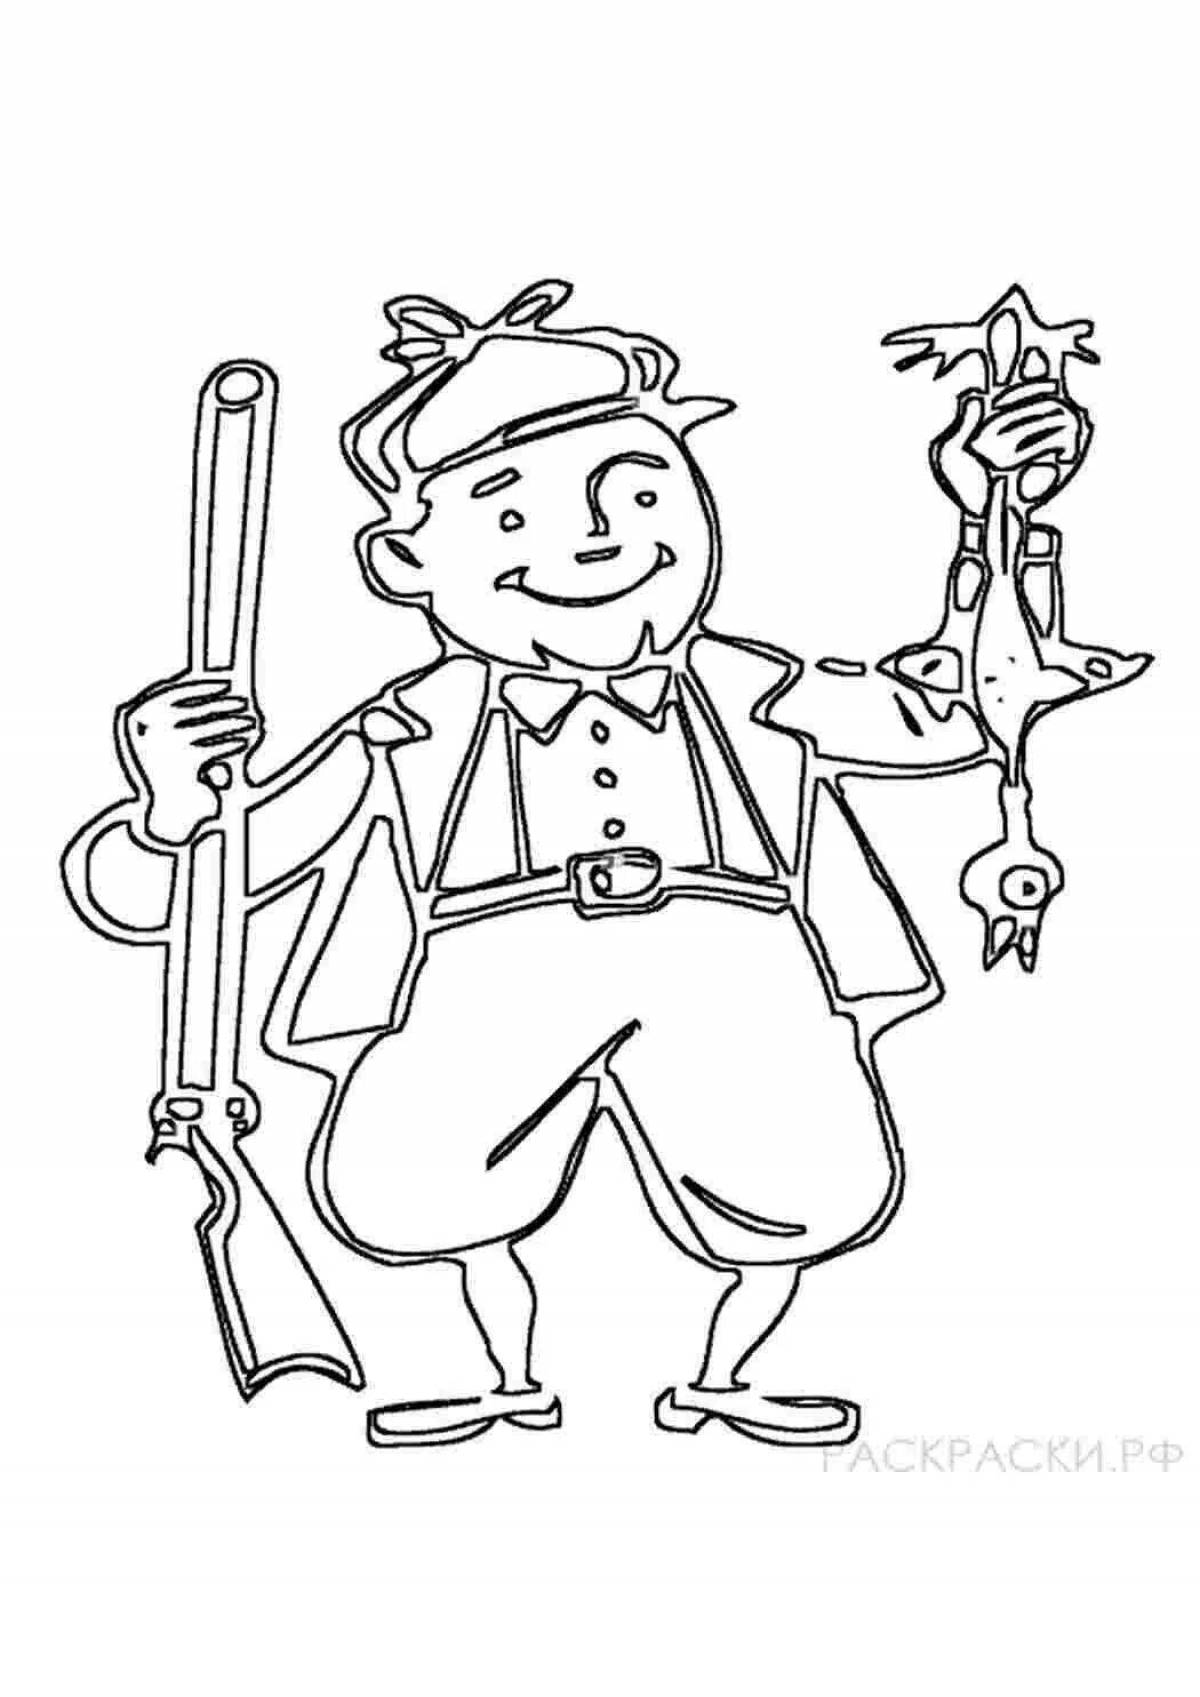 Coloring page elegant hunter with a gun